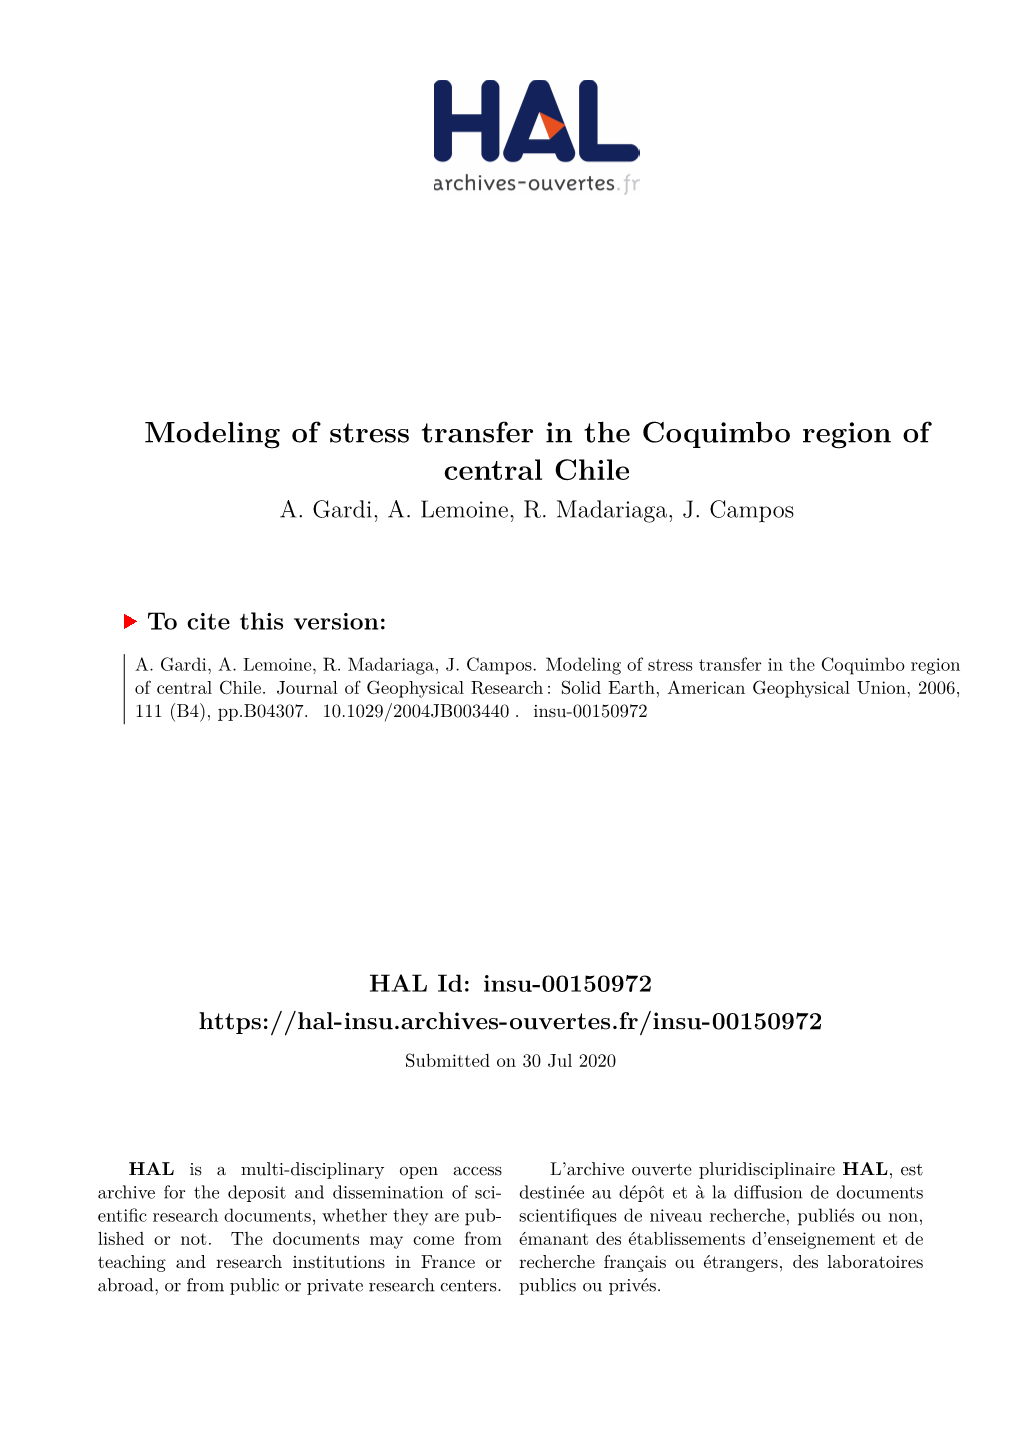 Modeling of Stress Transfer in the Coquimbo Region of Central Chile A